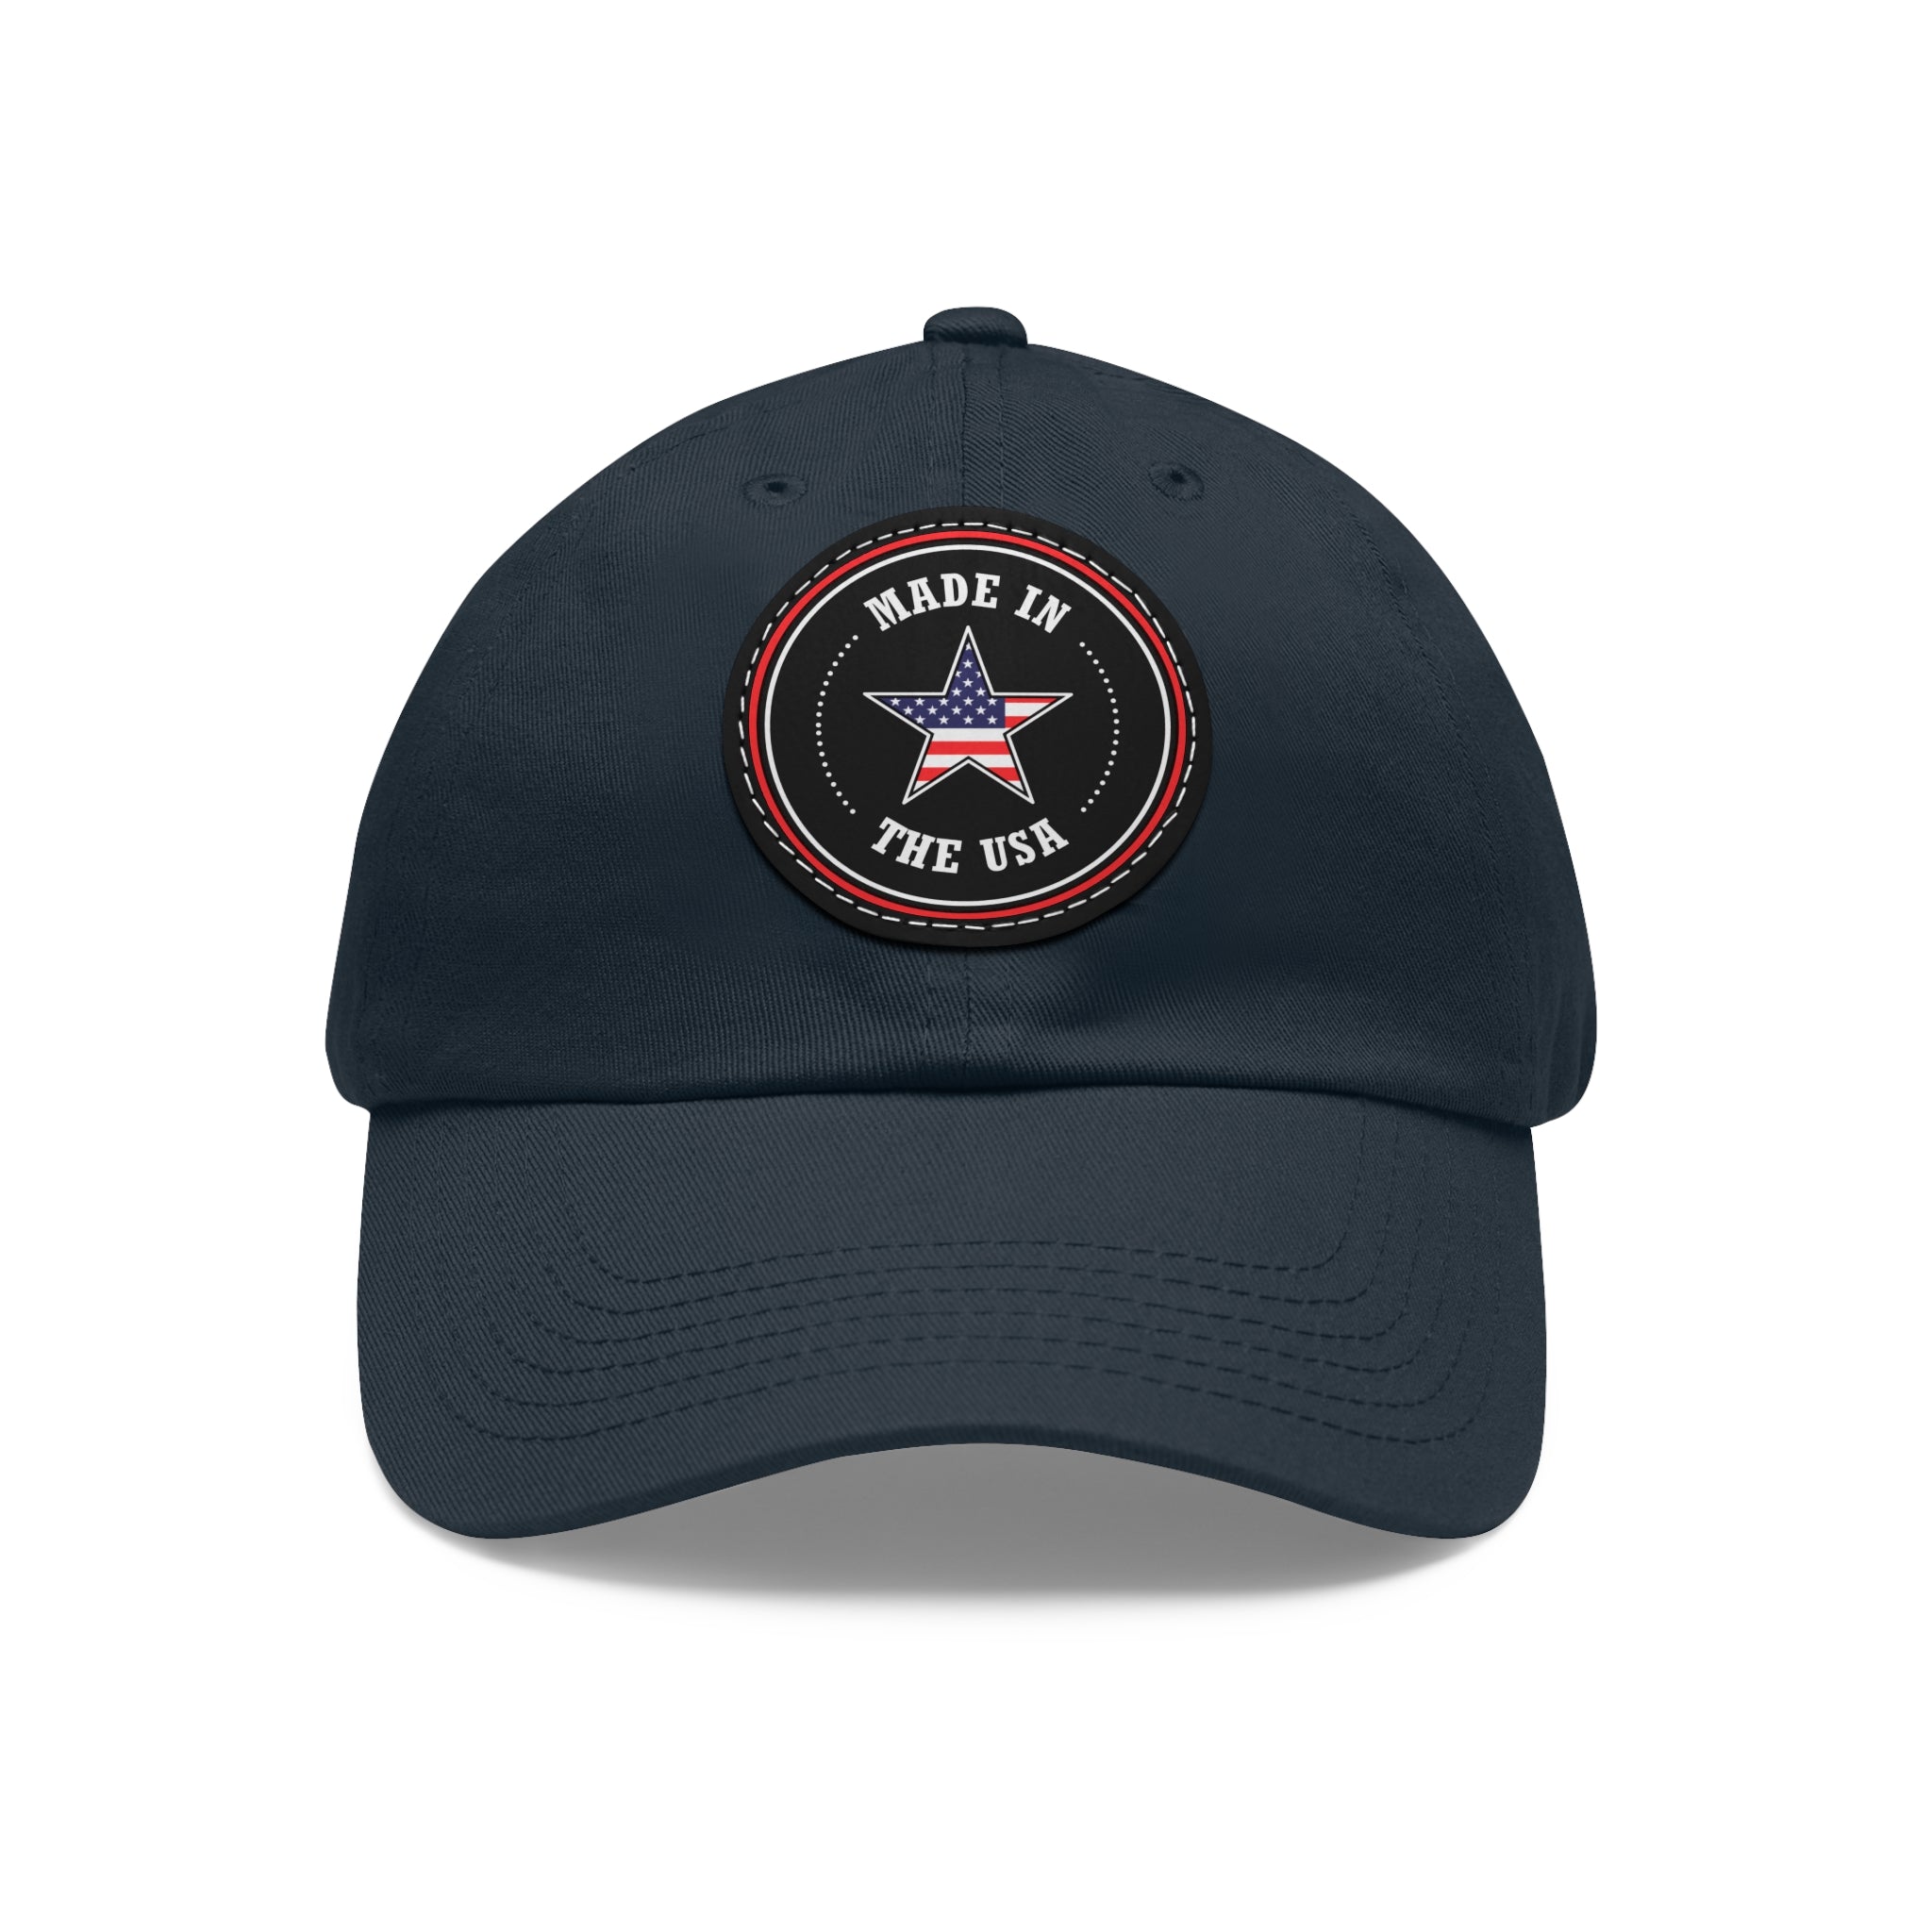 Made in the USA Dad Hat